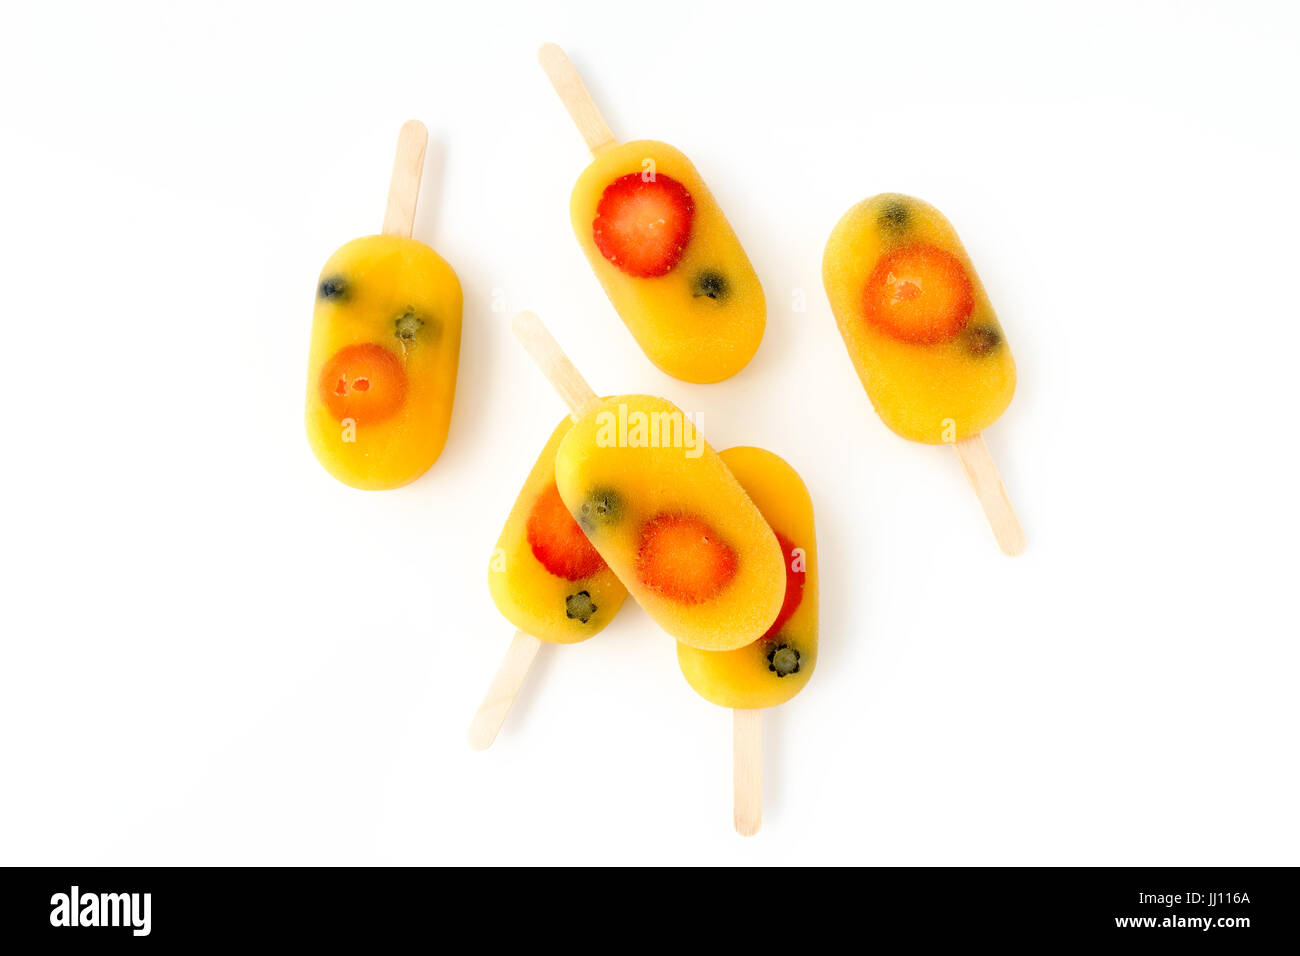 Homemade fruit ice pop, popsicle, ice cream lolly with orange juice, fresh strawberries and blueberries arranged on a white background with copy space Stock Photo